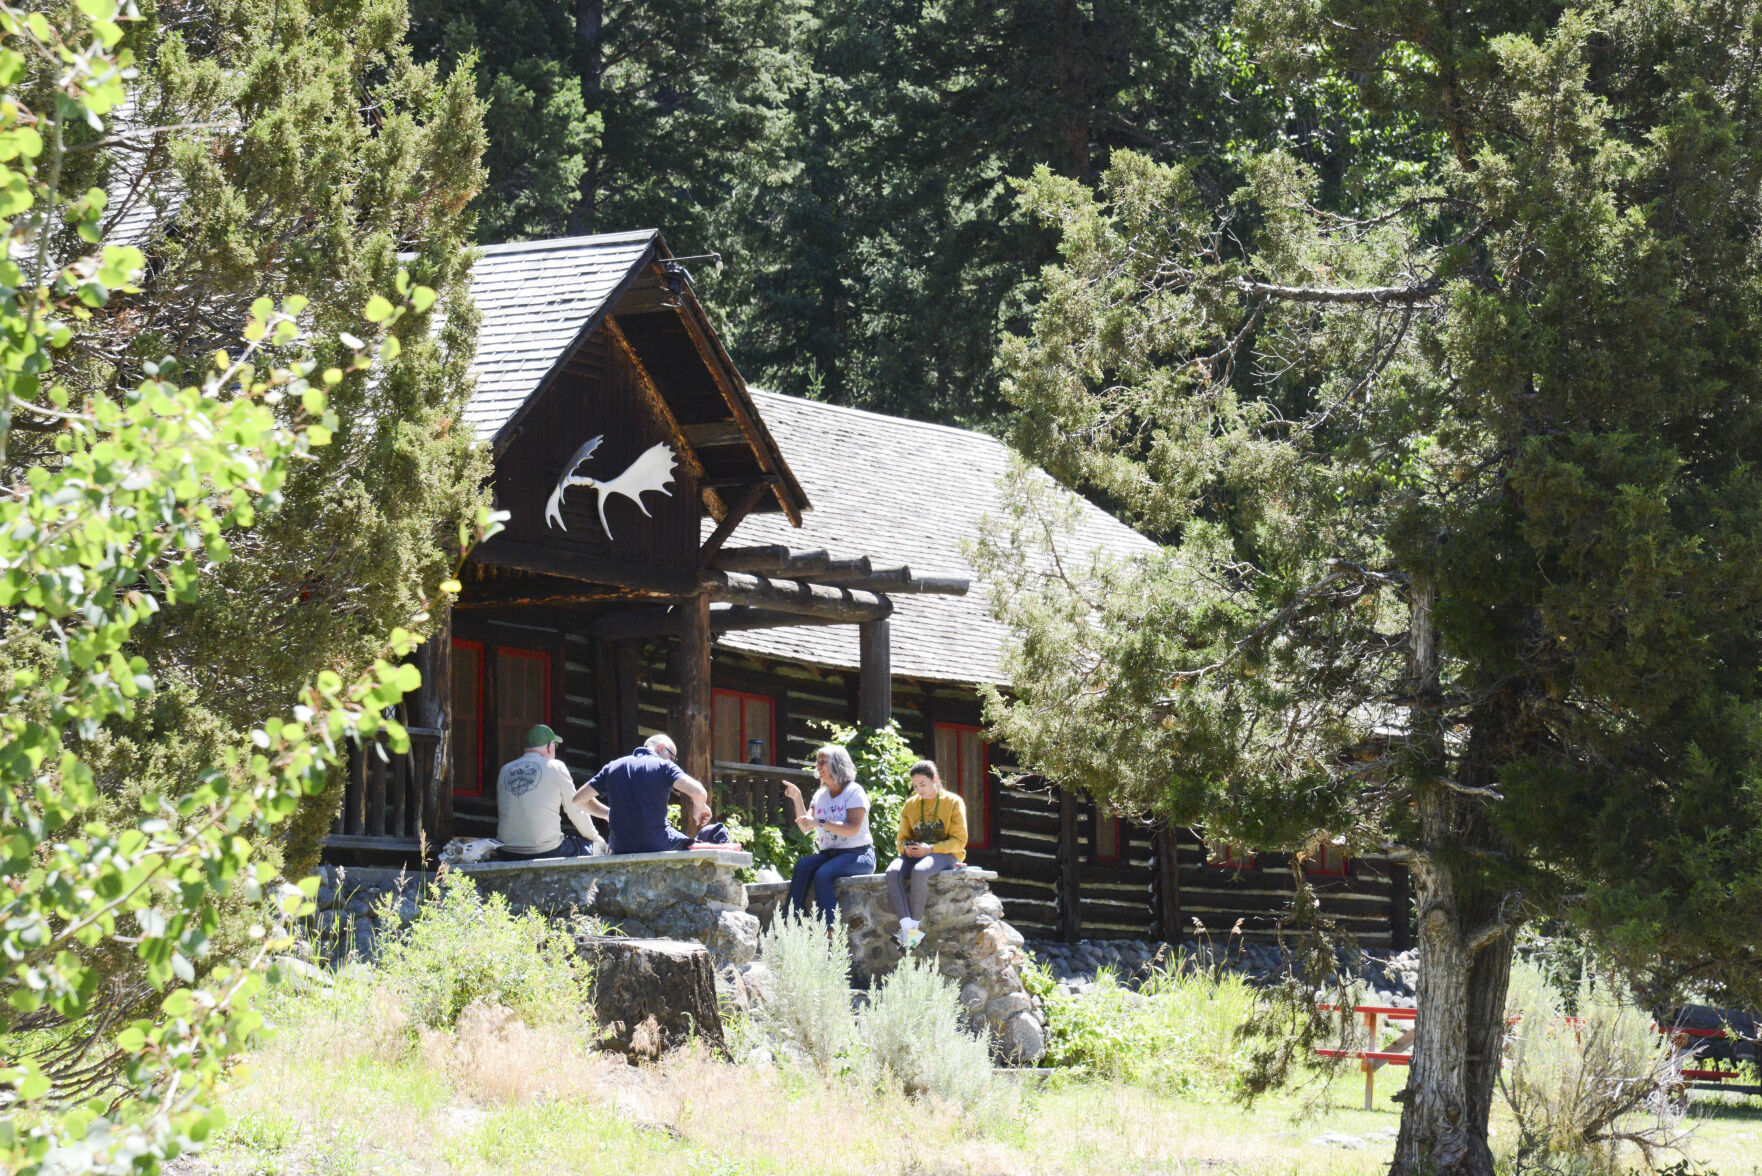 A slice of history After restoring Montanas first dude ranch, Forest Service weighs next steps Business bozemandailychronicle photo